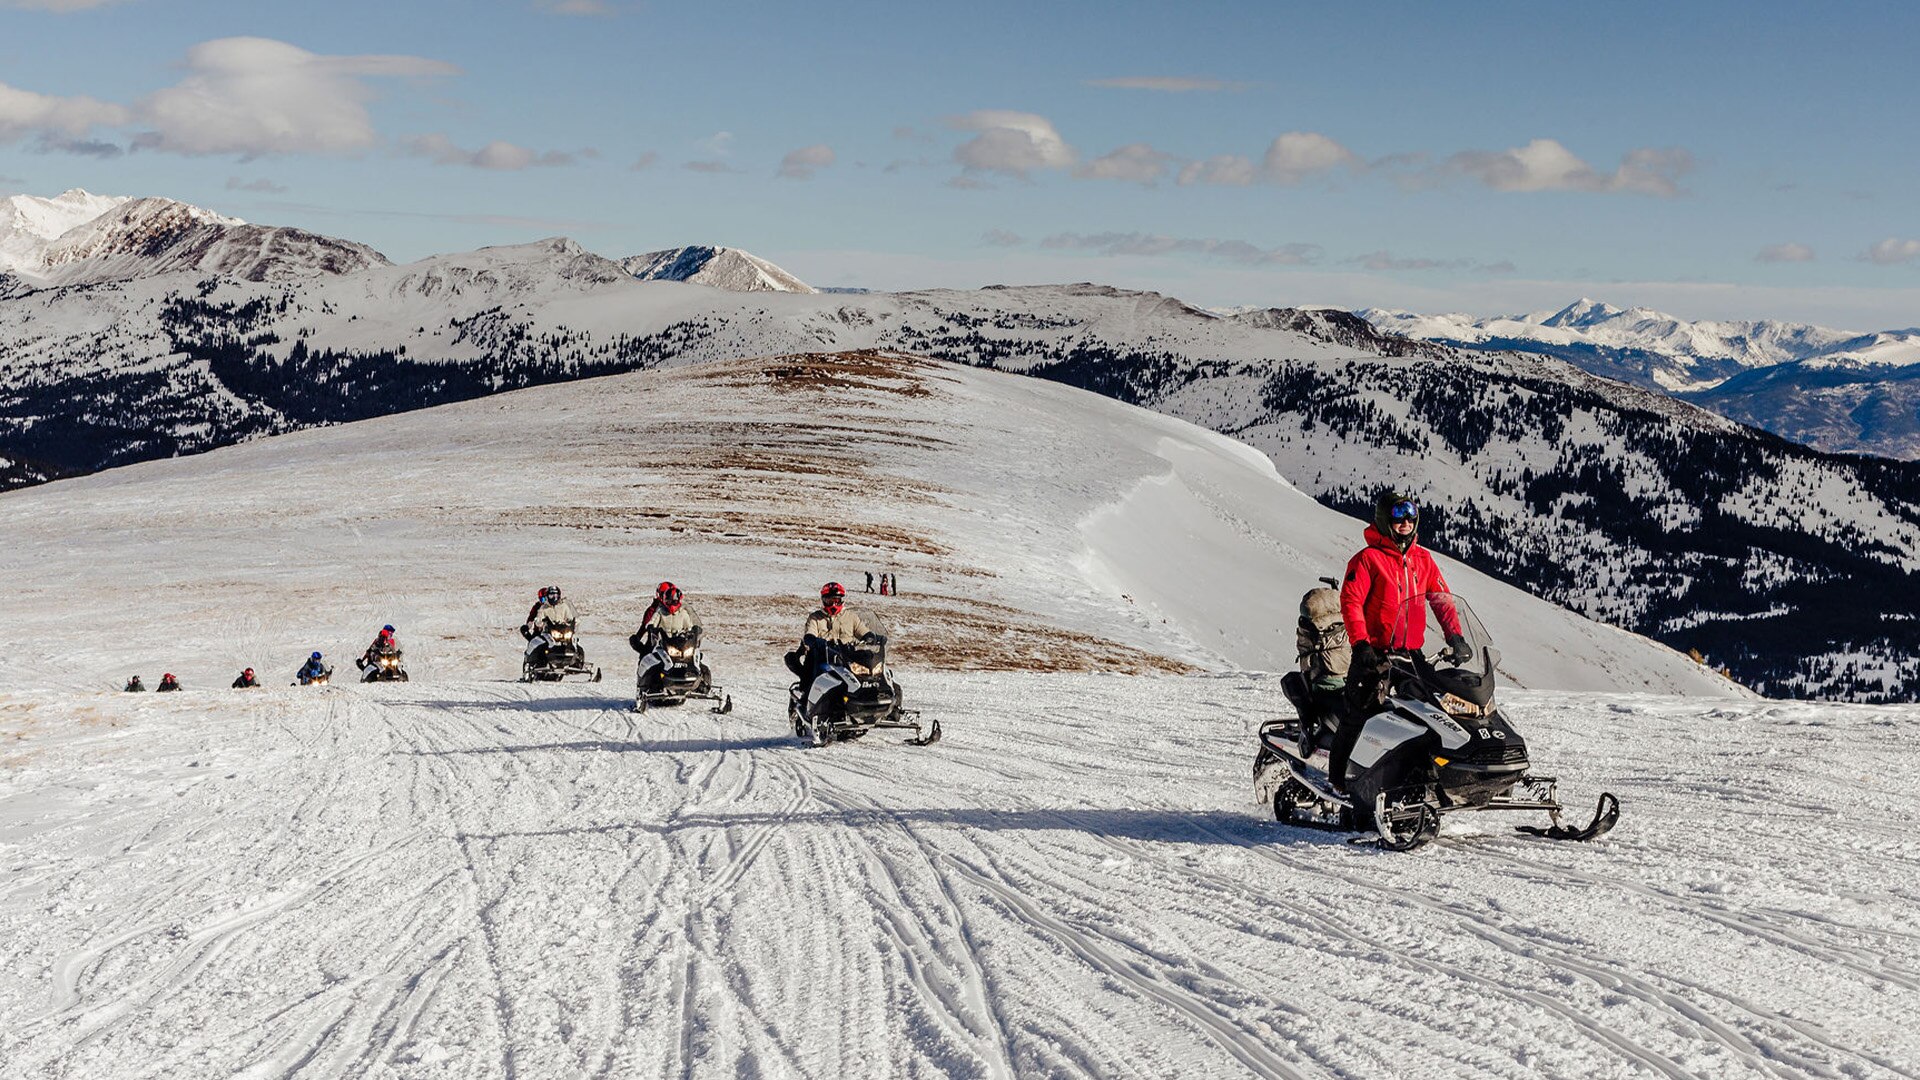 Group of Ski-Doo riders fallowing a guide